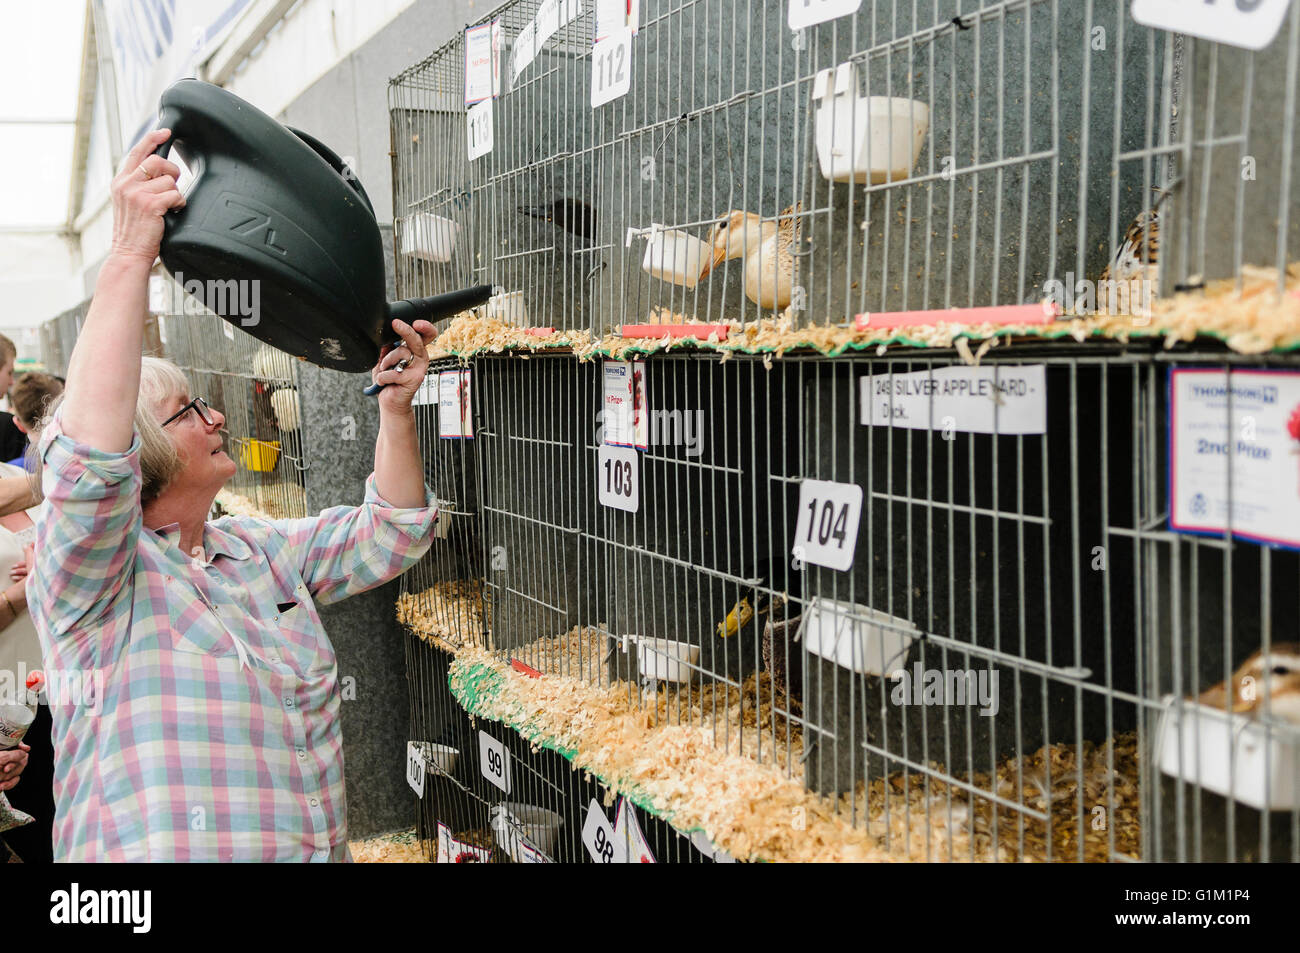 A woman tops up water holders for ducks in cages at an agricultural show. Stock Photo